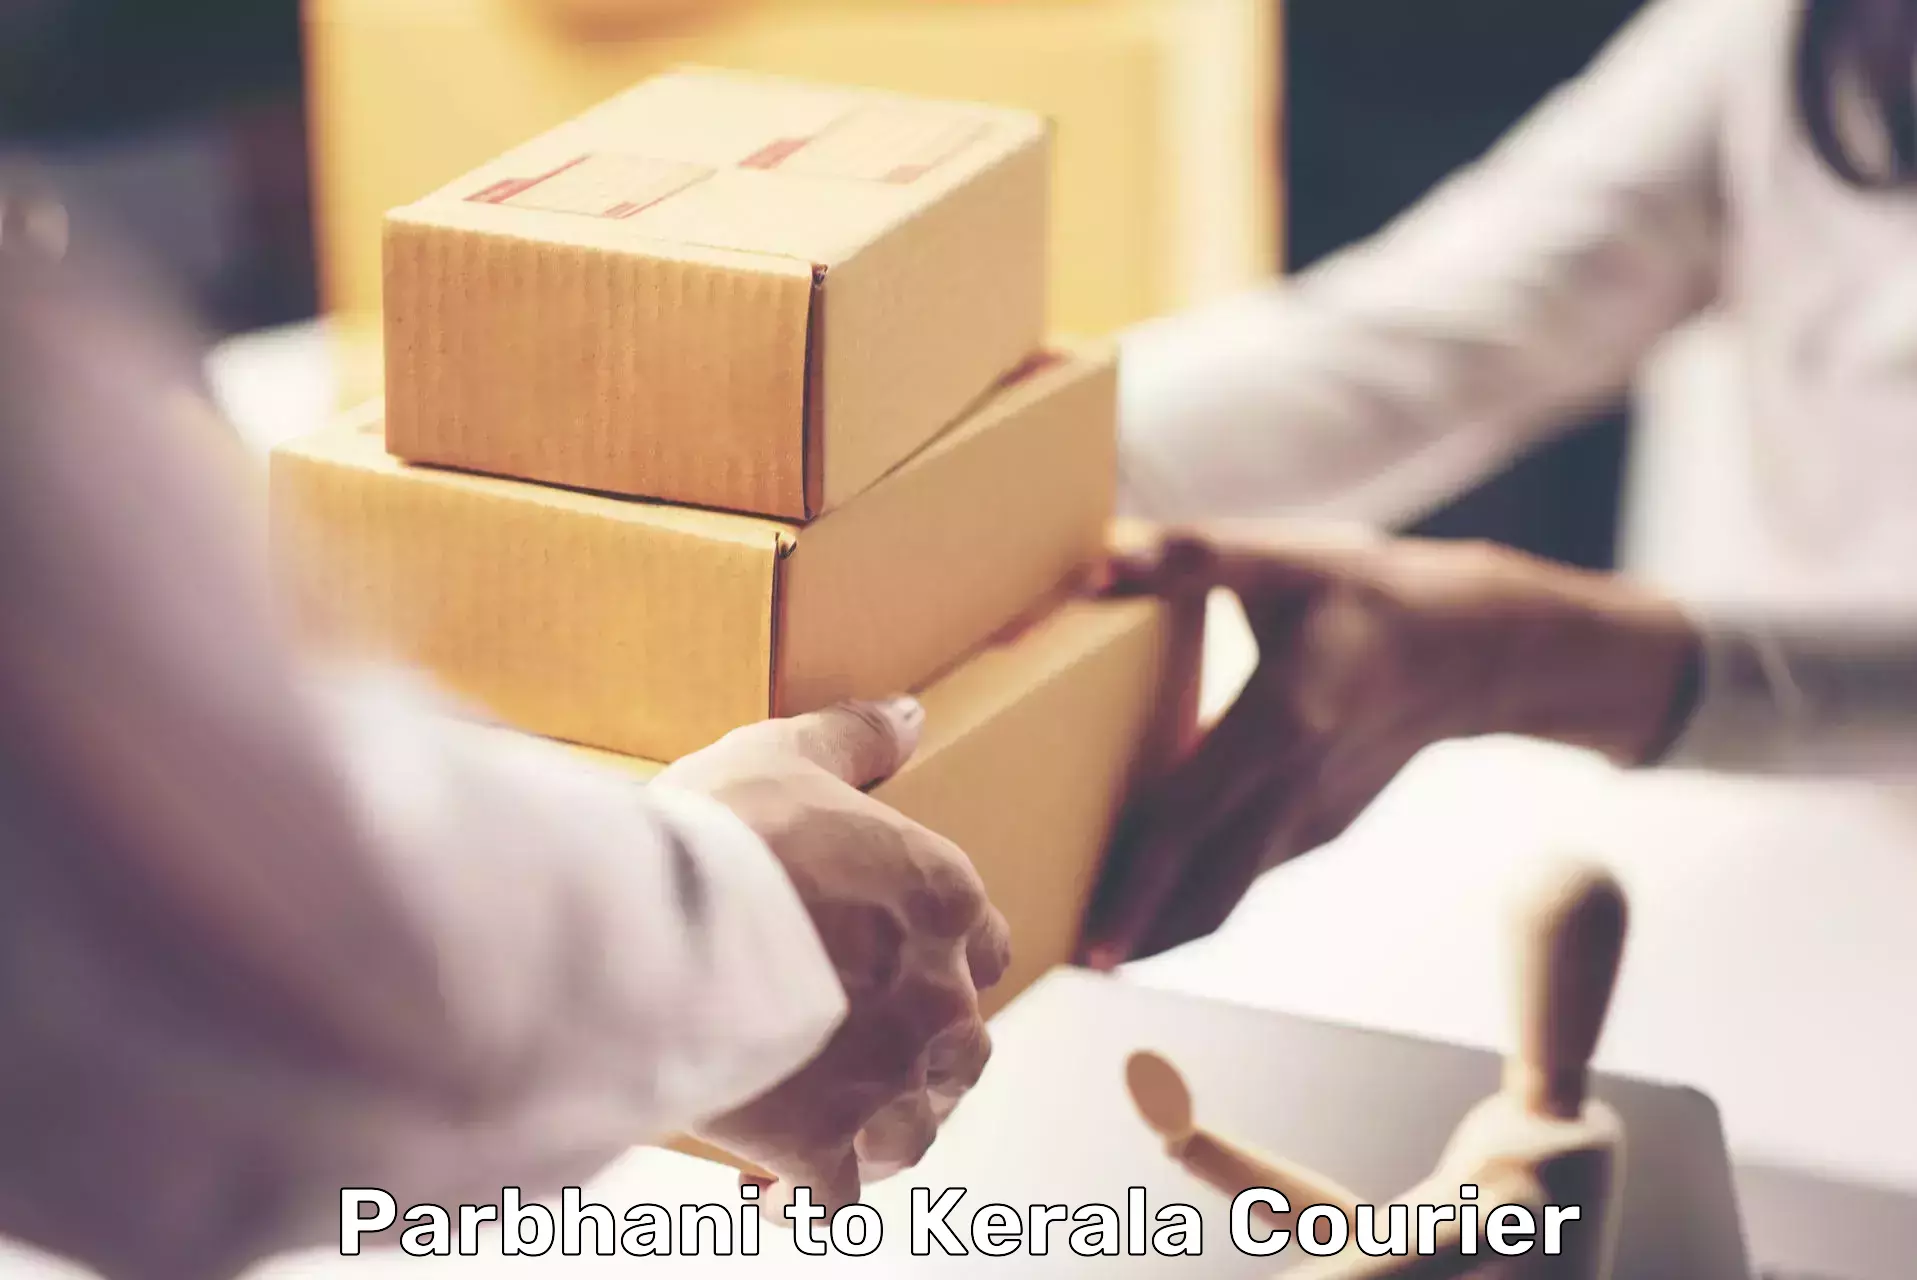 Customer-focused courier Parbhani to Kozhikode